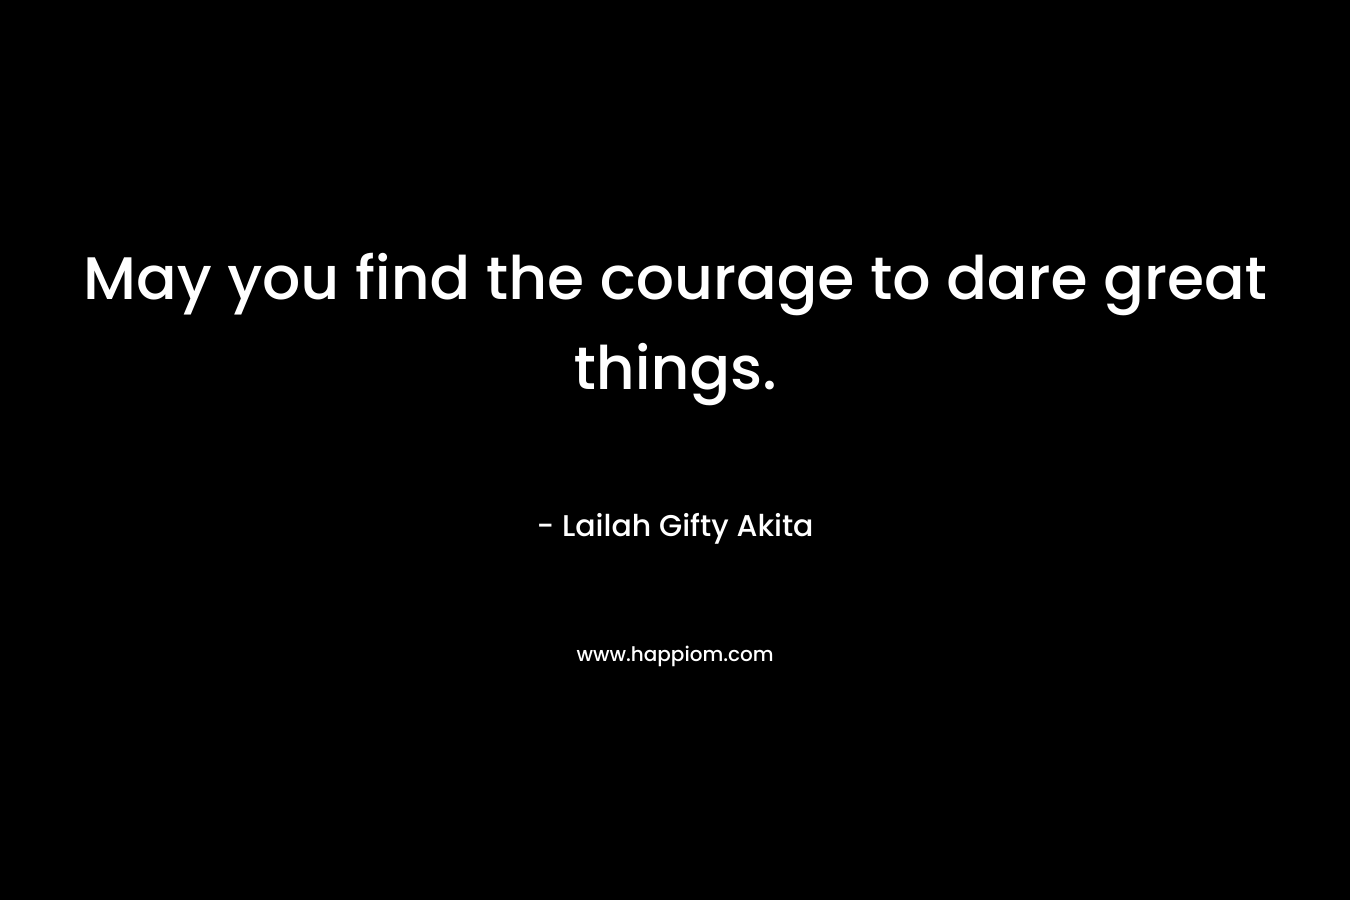 May you find the courage to dare great things.